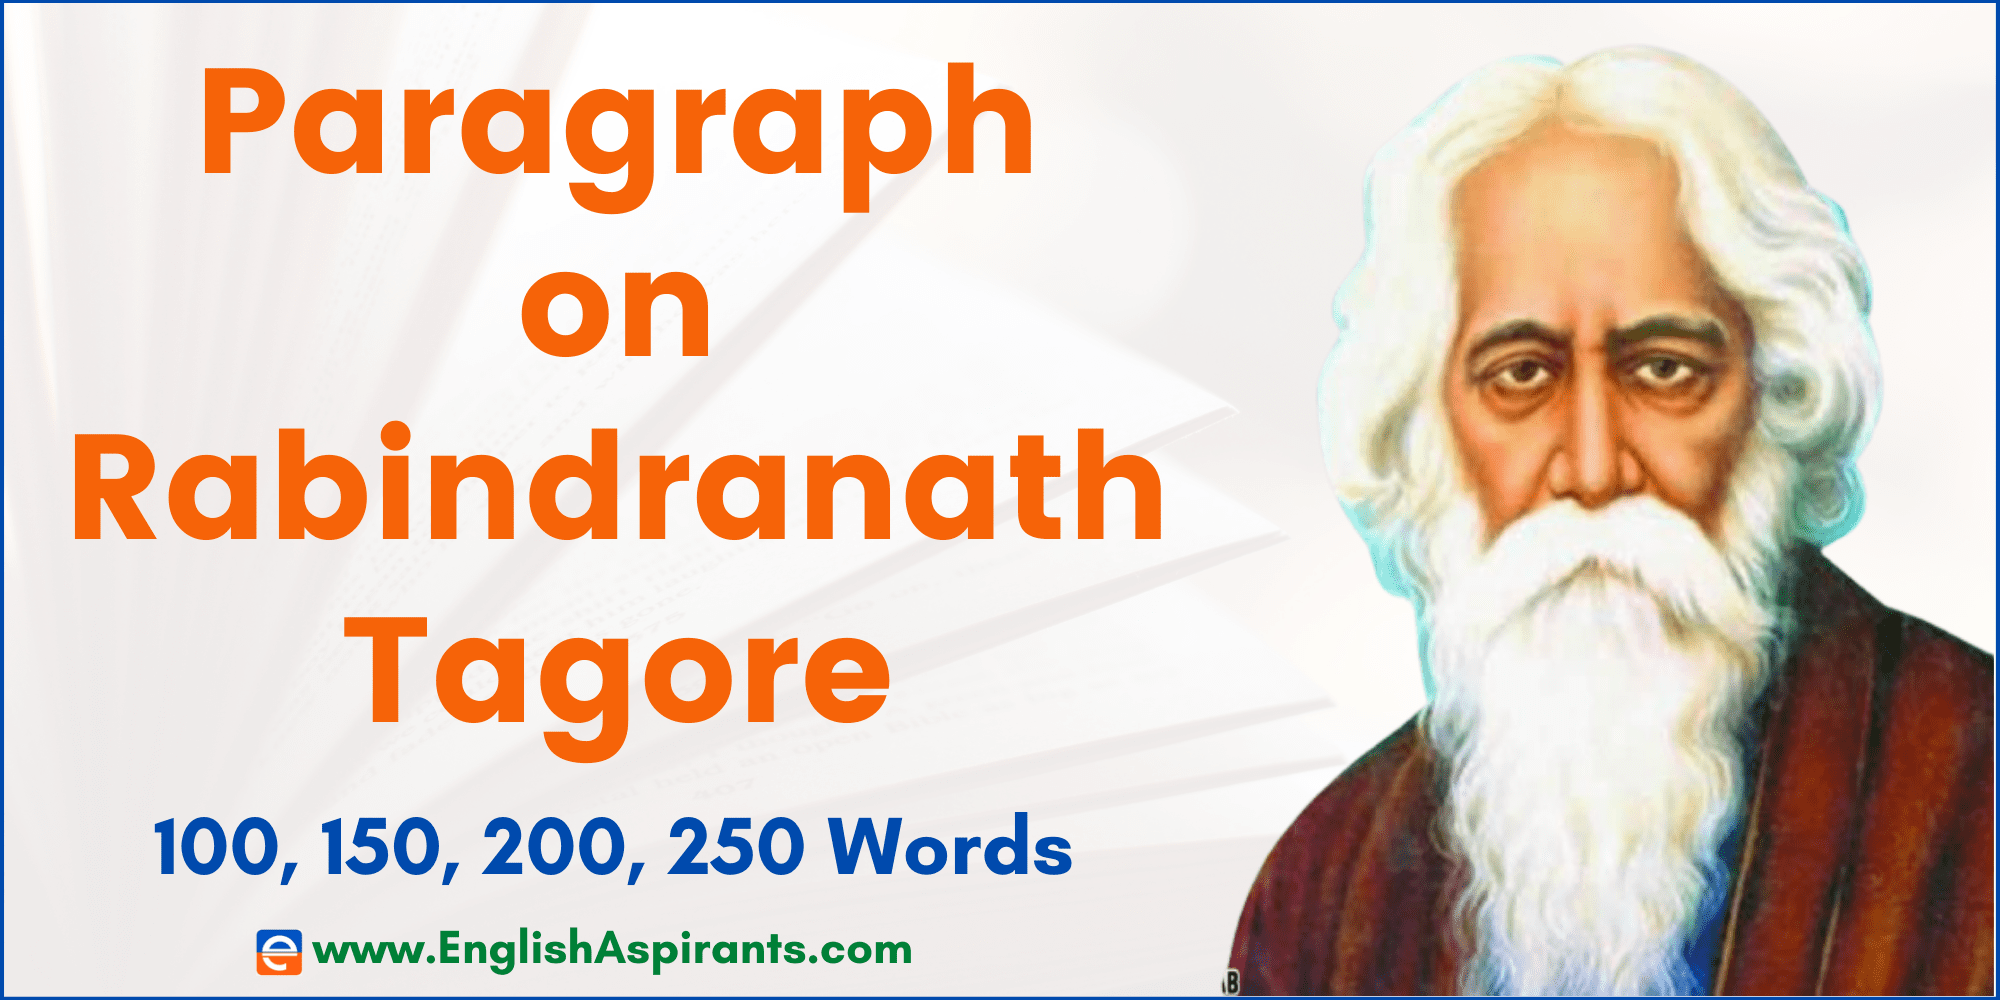 Paragraph on Rabindranath Tagore [100, 150, 200, 250 Words]